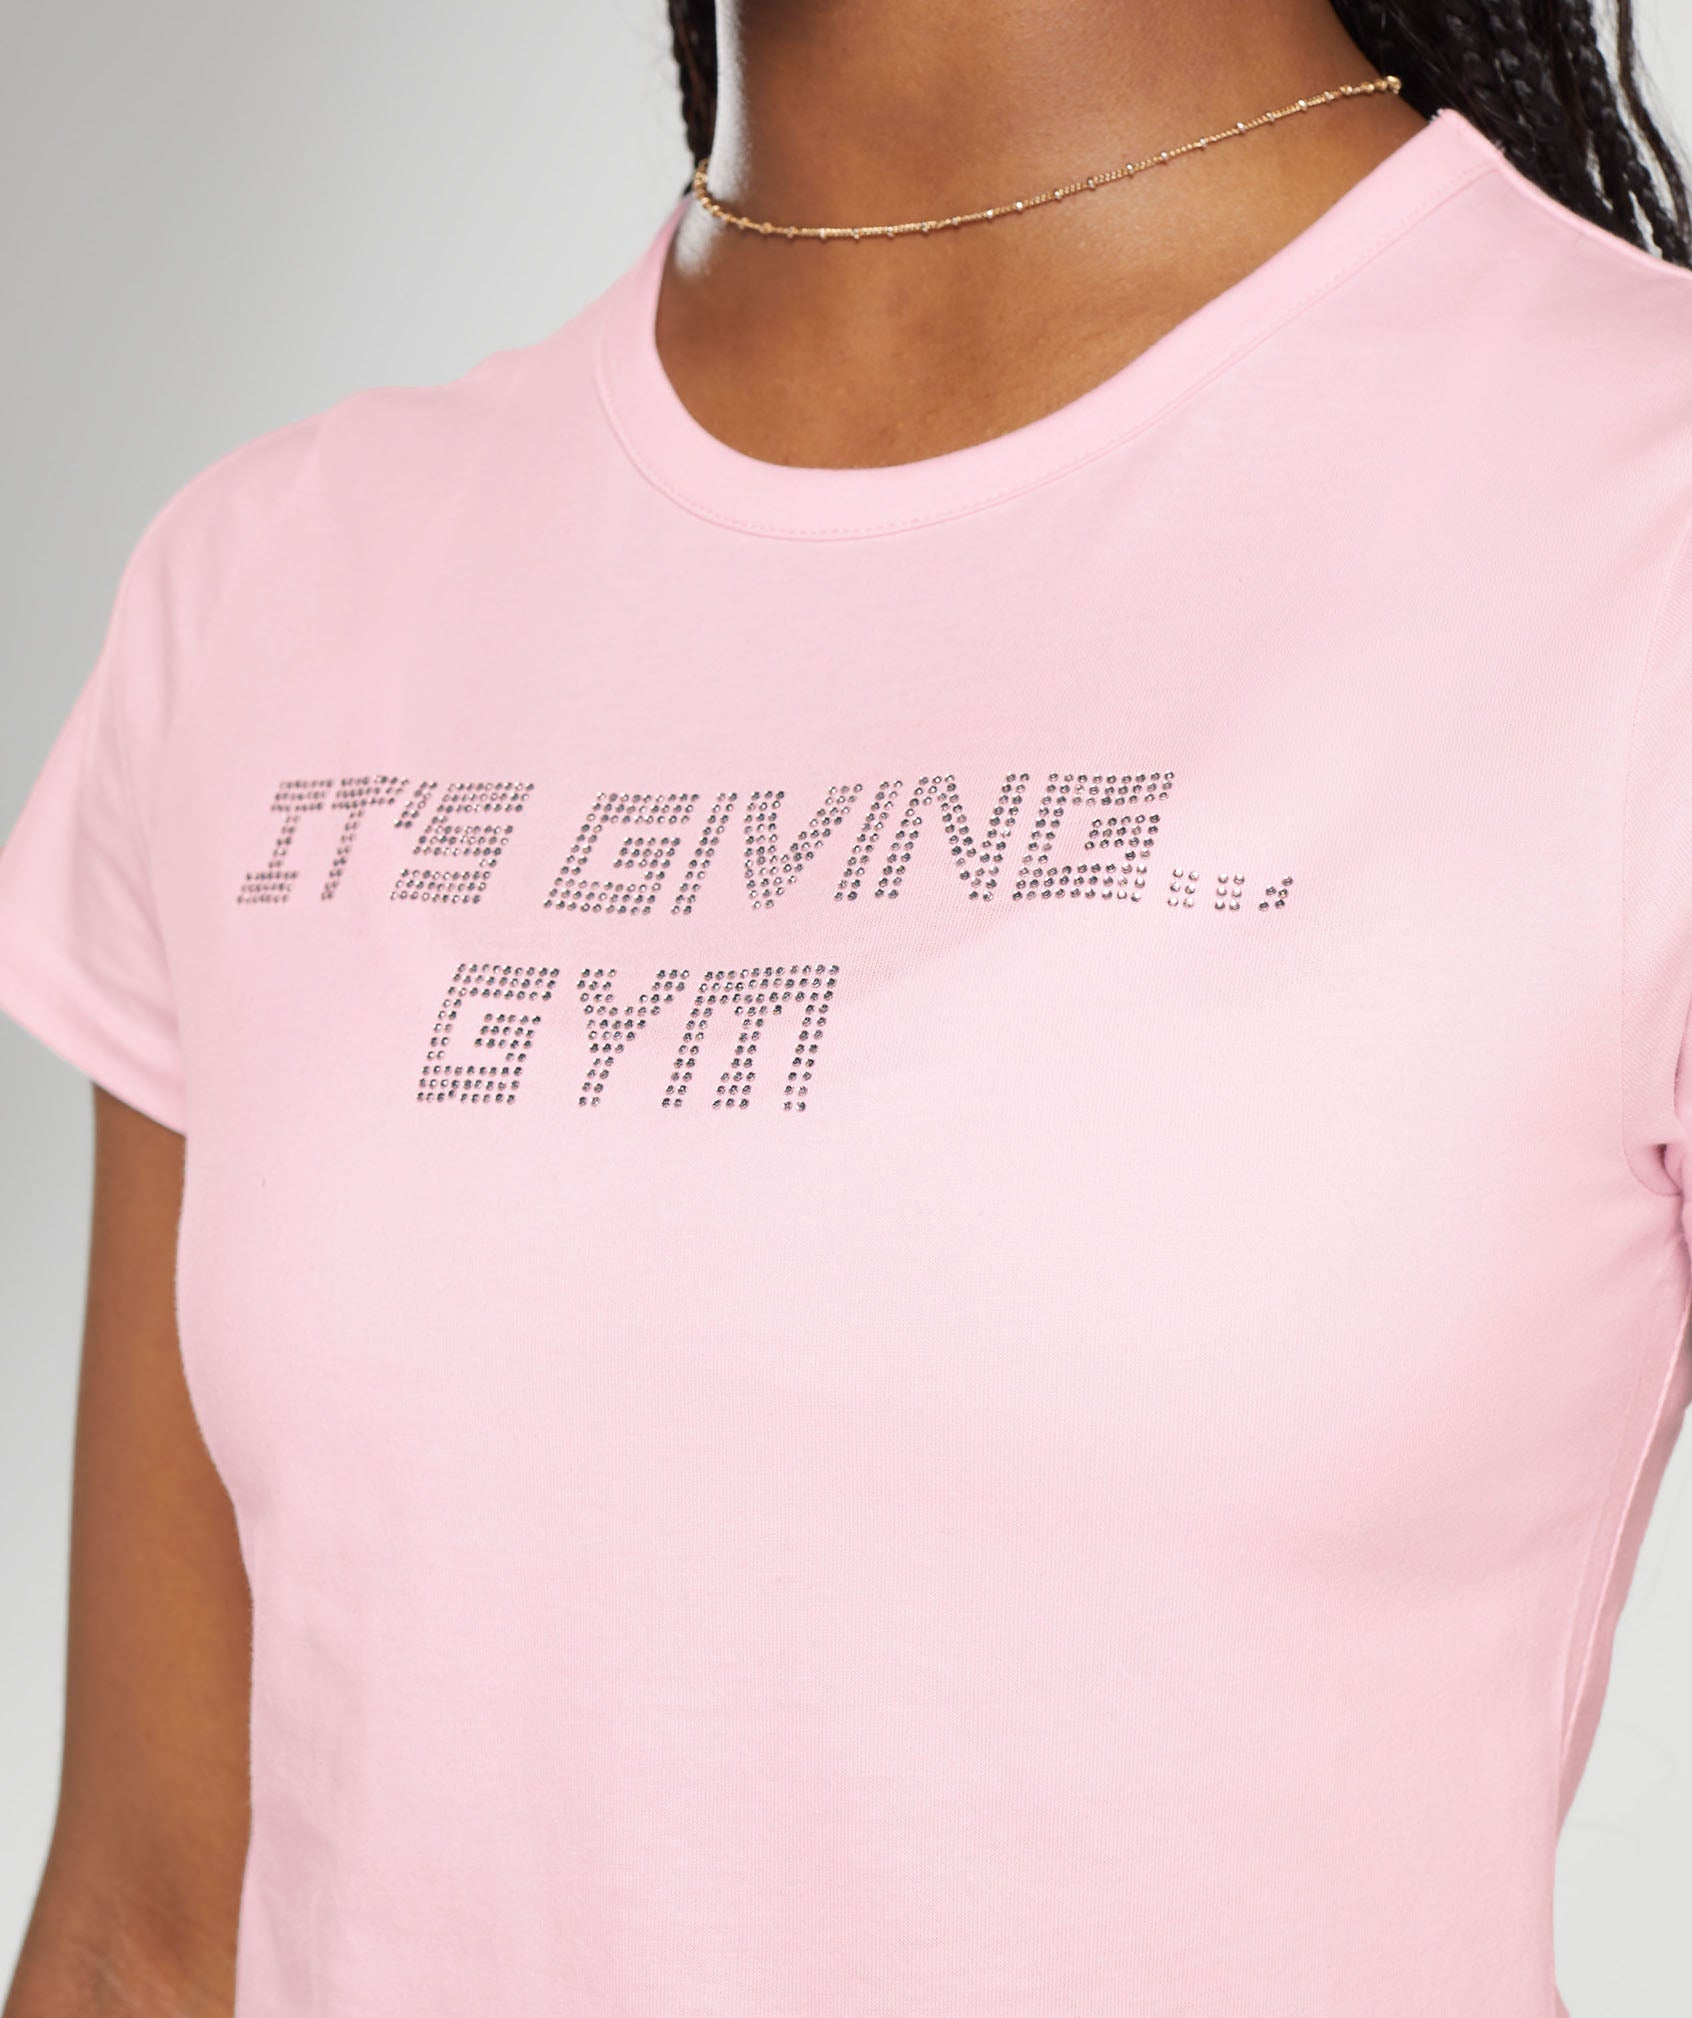 Its Giving Gym Baby T-Shirt in Dolly Pink - view 4